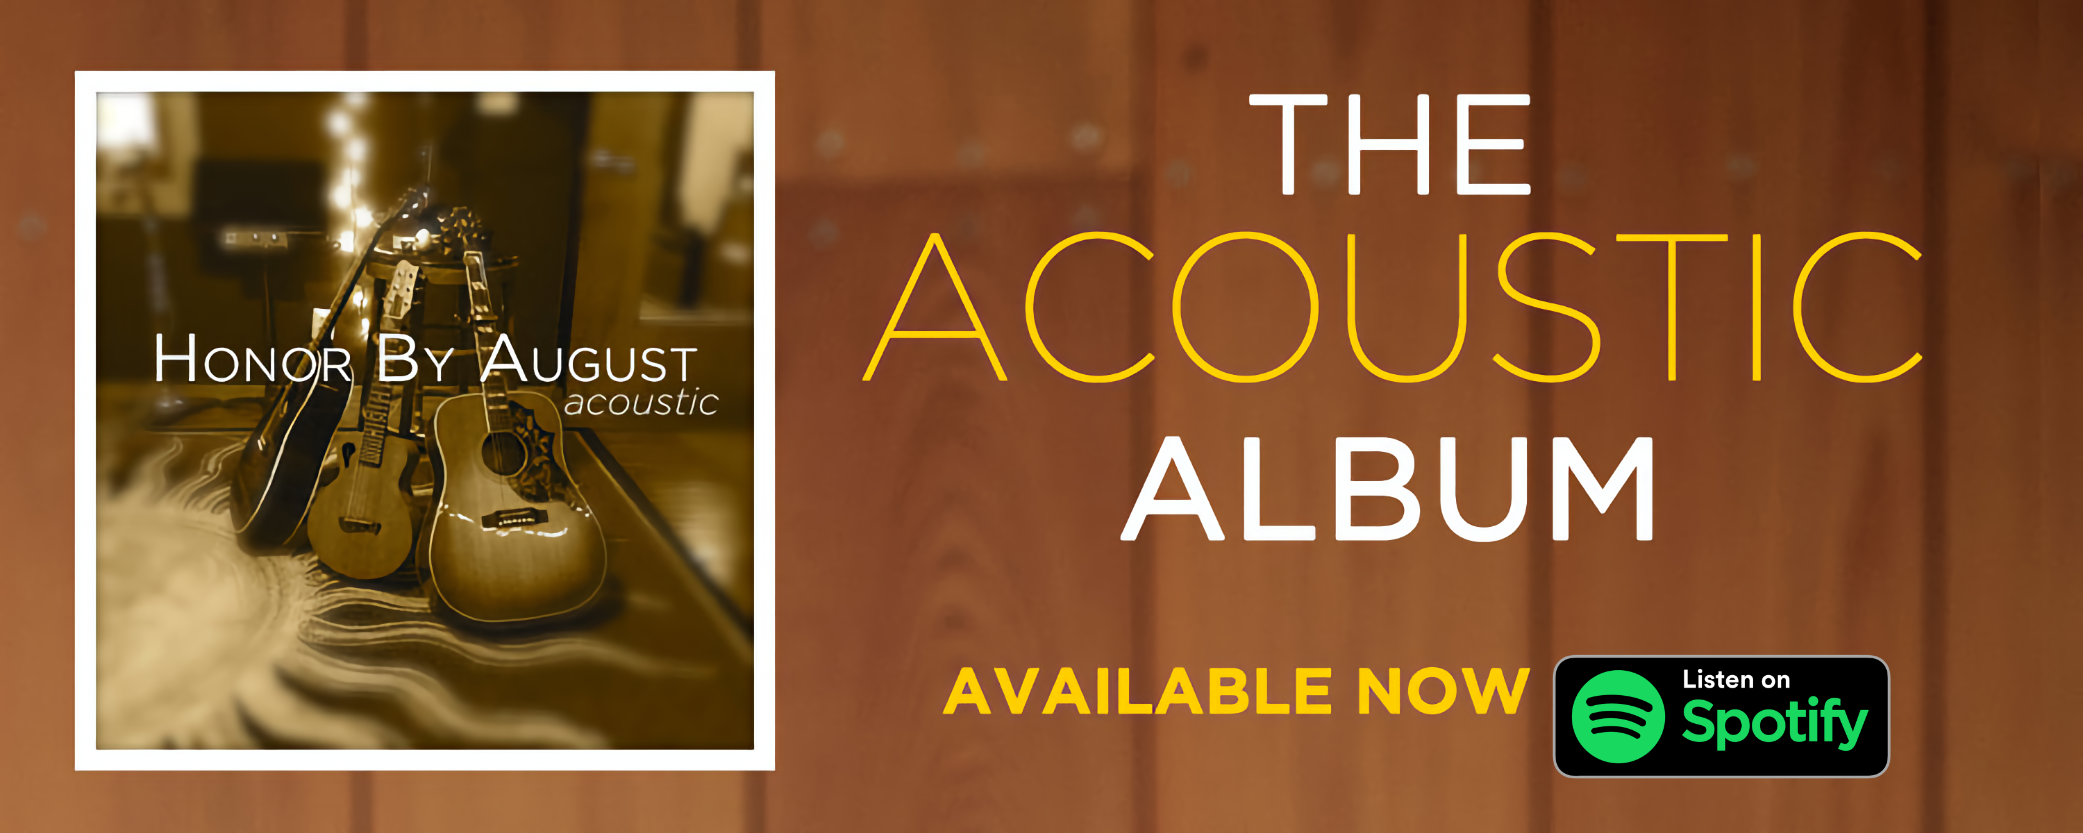 Listen to the Honor By August Acoustic album at Spotify